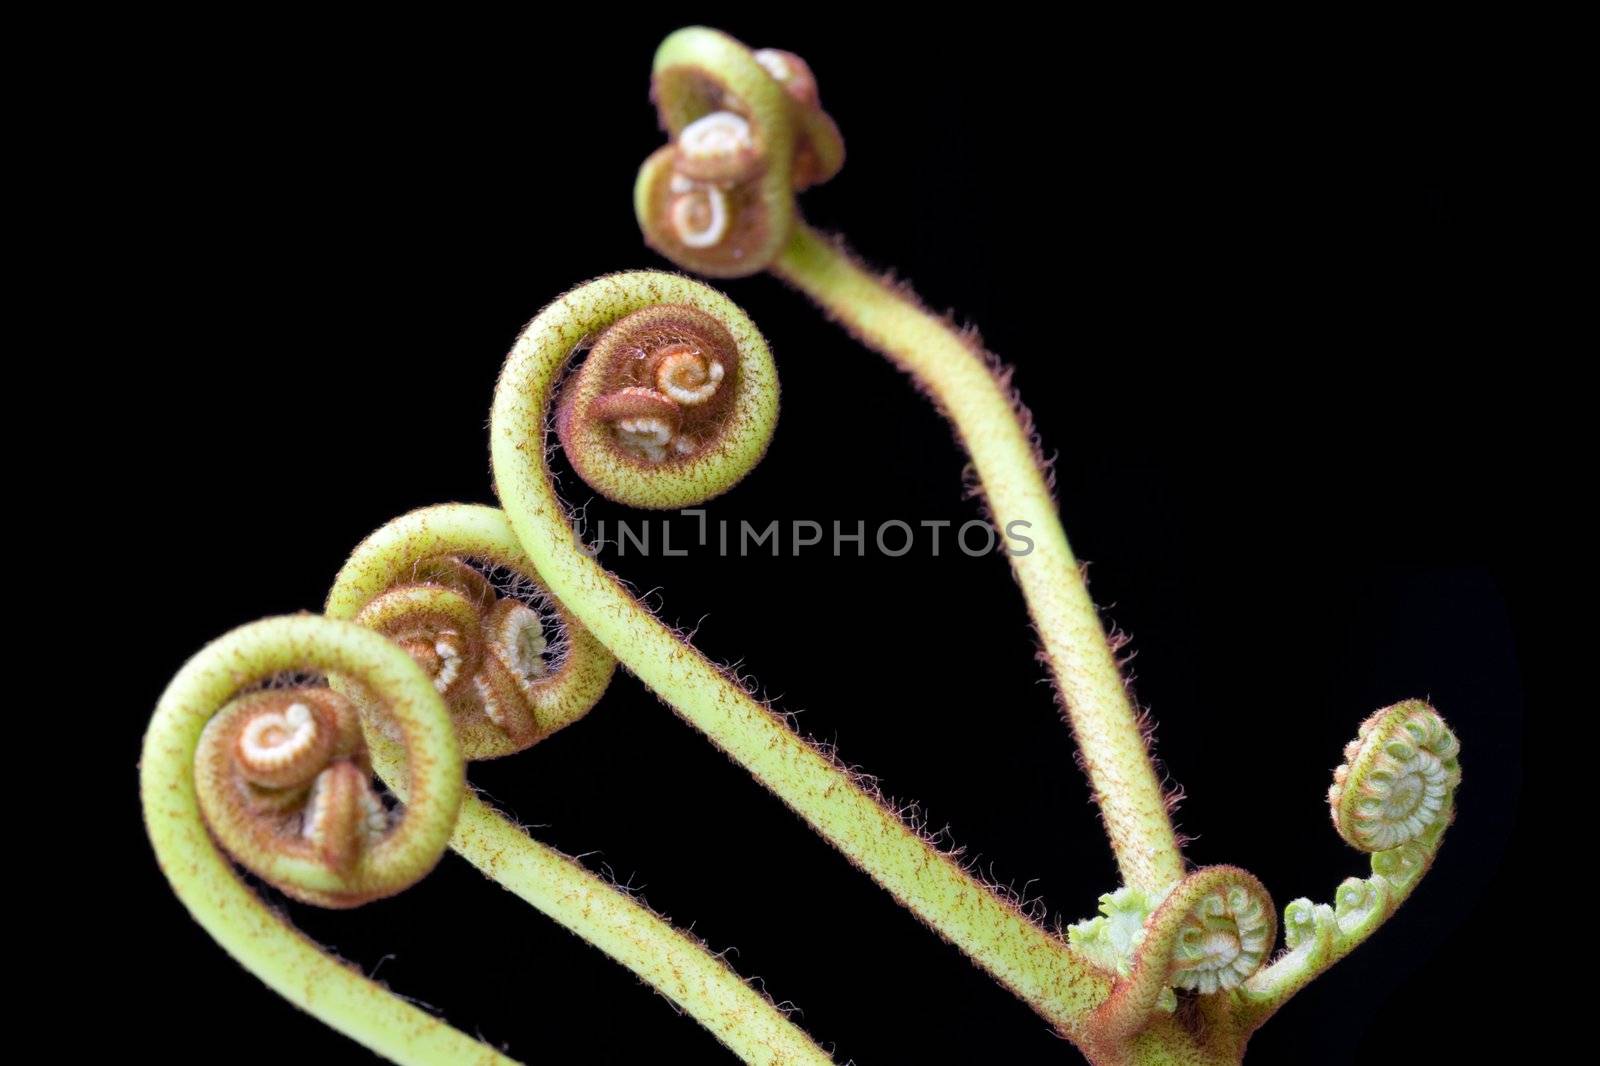 New sporophyte fronds of Ferns (Pteridophyte) found at the tropical rainforest of Bukit Tinggi, Pahang, Malaysia. A fern, or pteridophyte, is any one of a group of some twenty thousand species of plants classified in the Division Pteridophyta, formerly known as Filicophyta. A fern is defined as a vascular plant that does not produce seeds, but reproduces by spores to initiate an alternation of generations. New sporophyte fronds typically arise by circinate vernation (that is, "leaf" formation by unrolling). 
